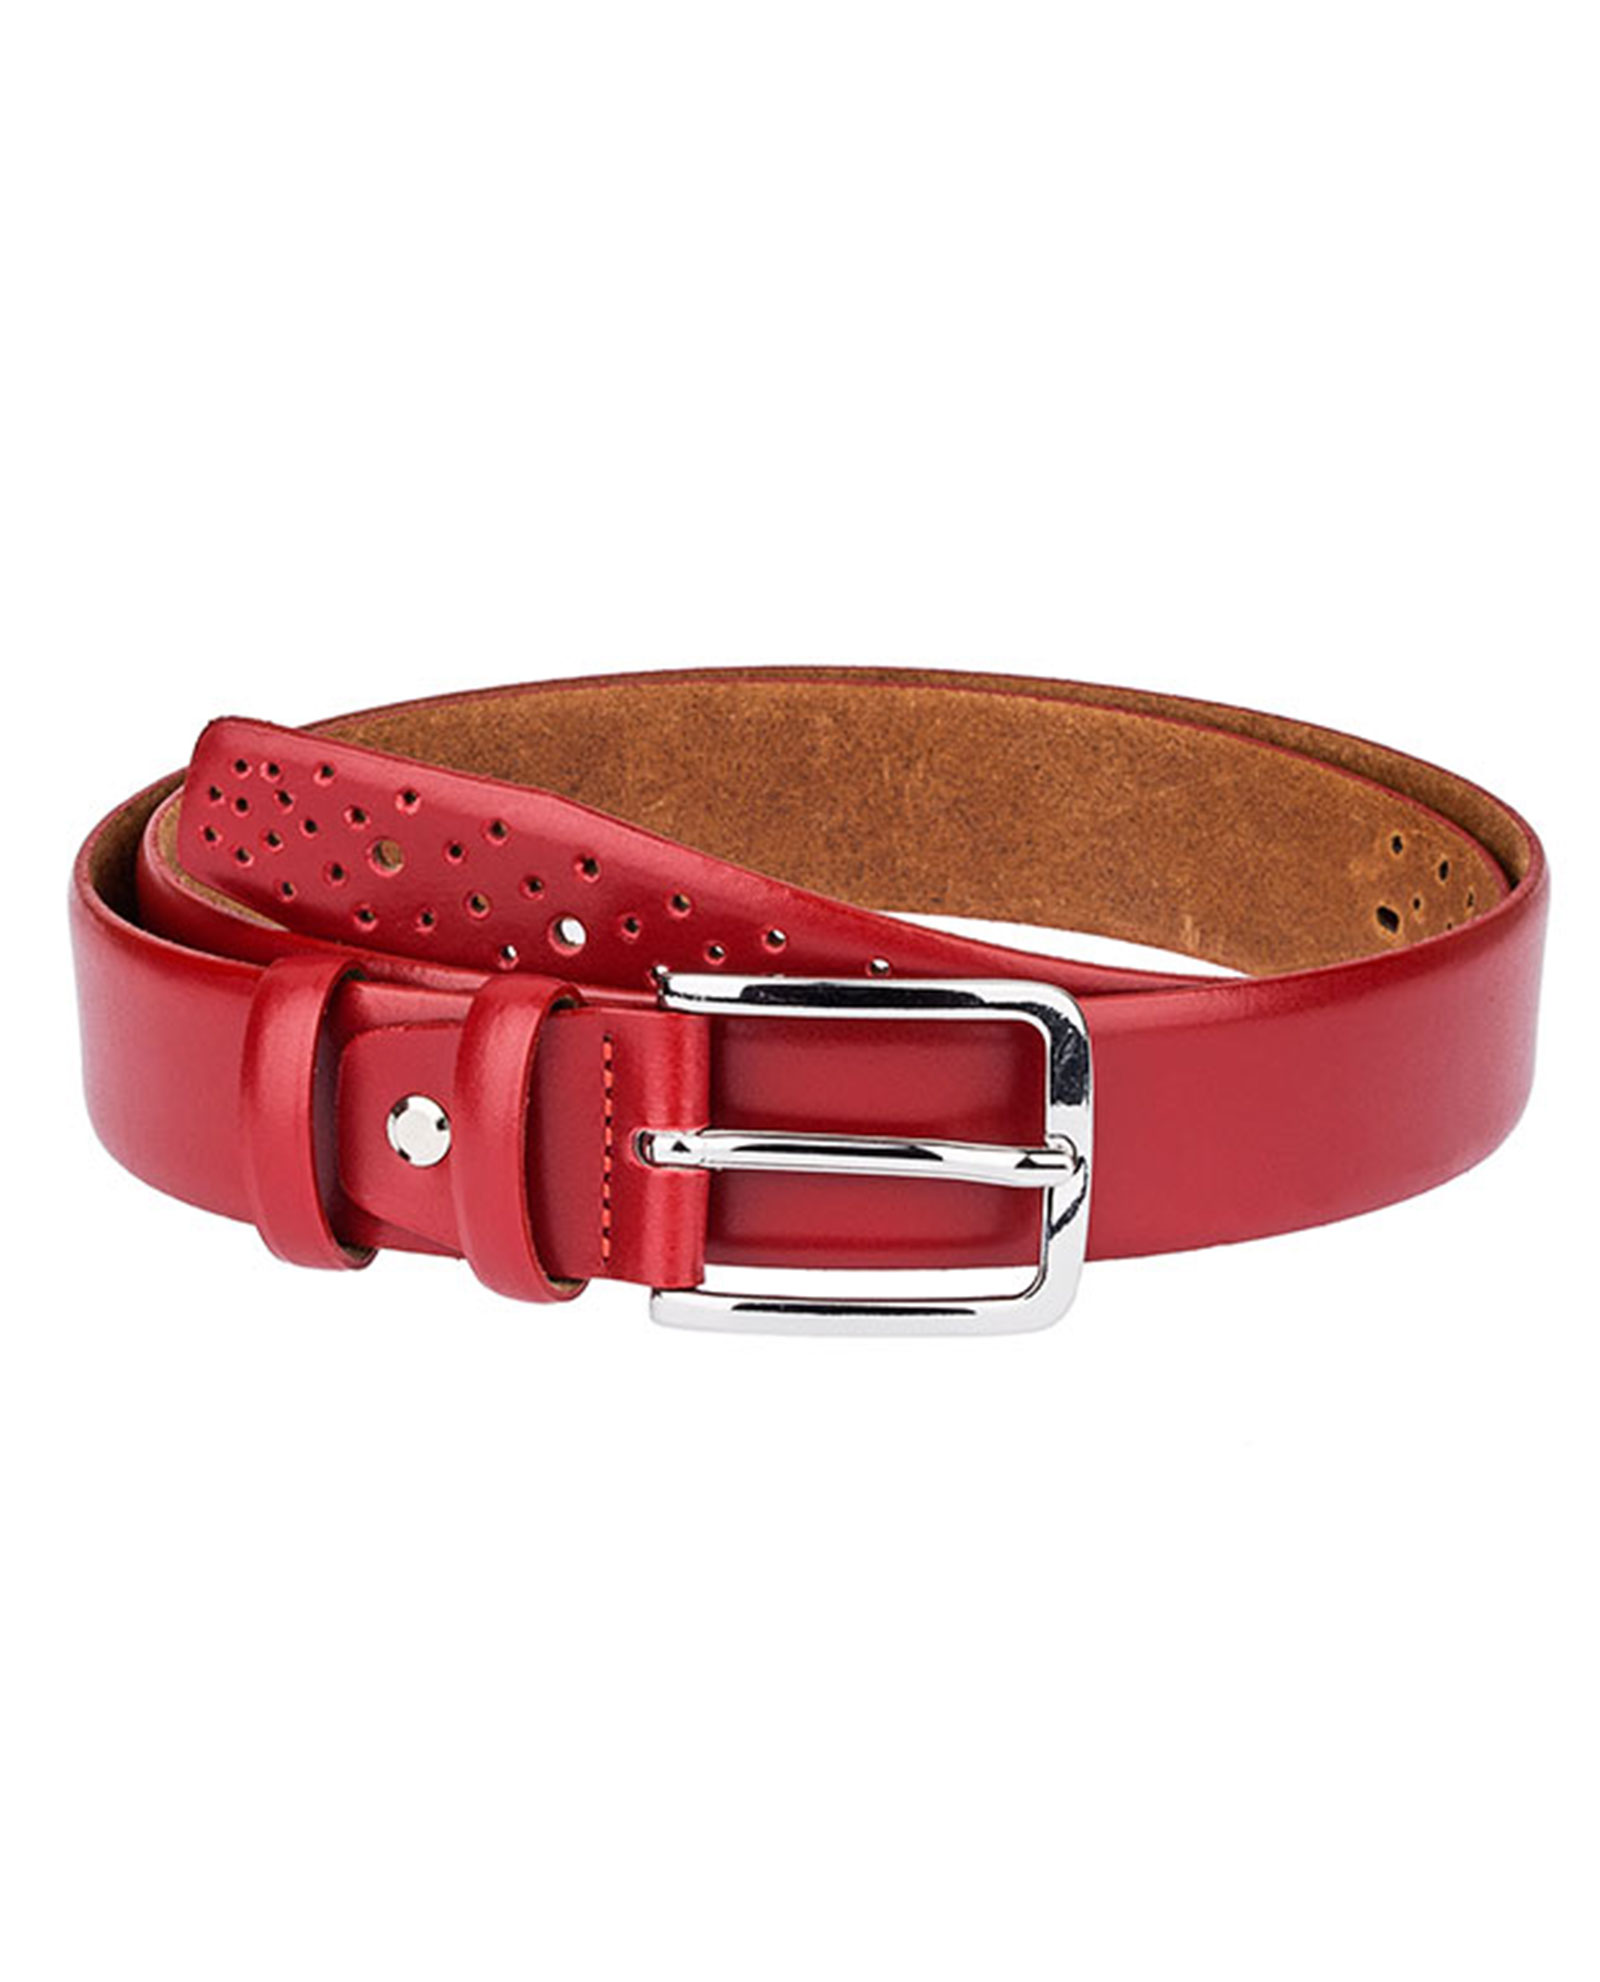 Perforated Red Leather Belt Front 